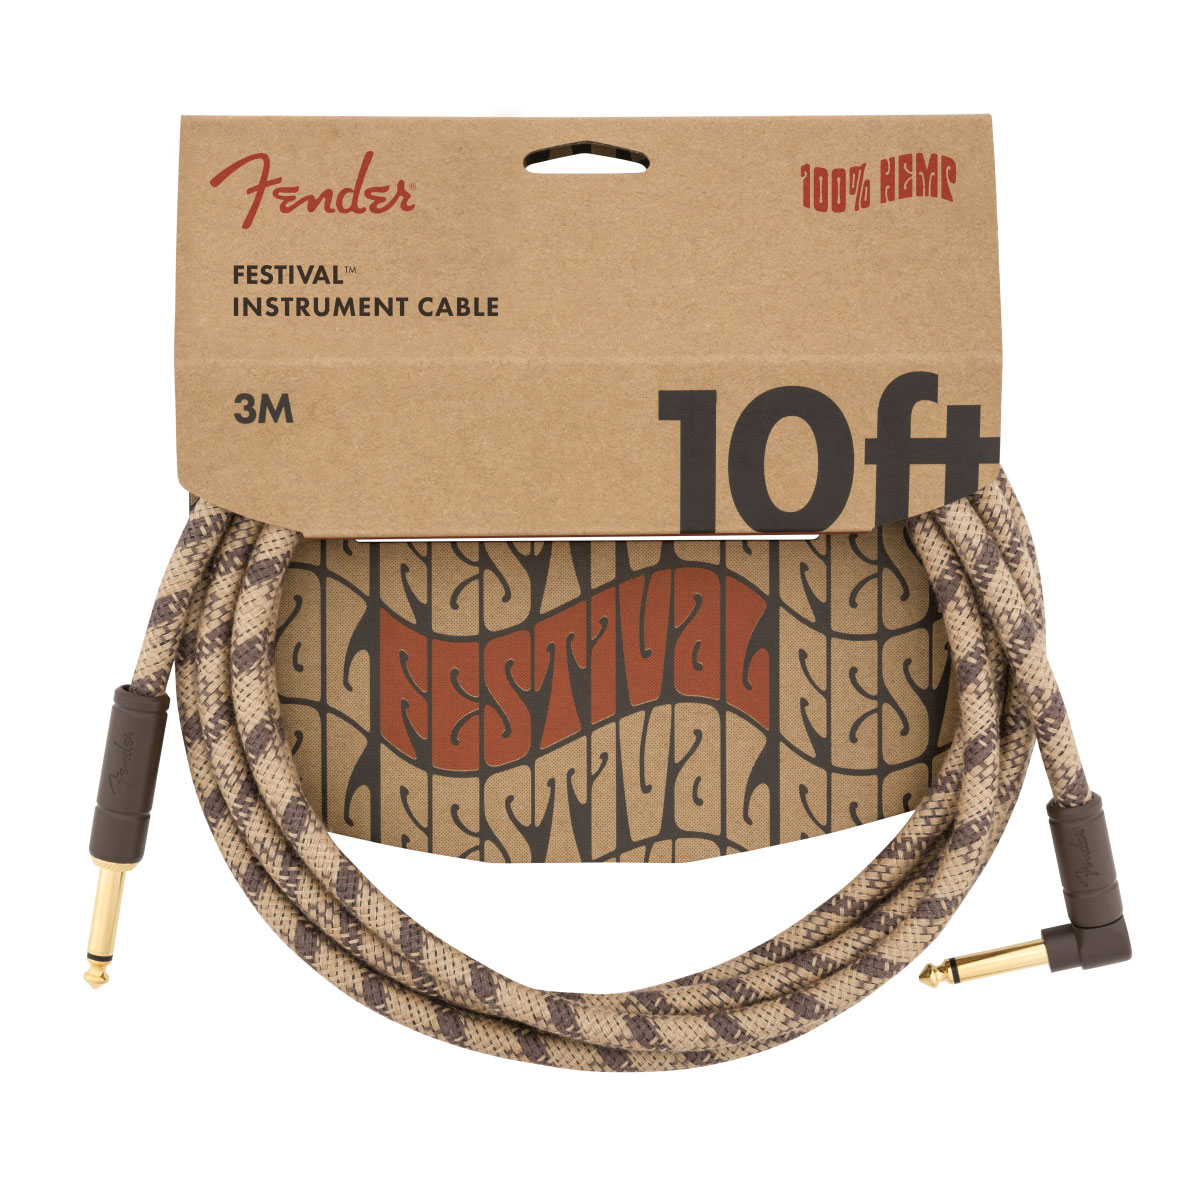 FENDER 10' ANGLED FESTIVAL INSTRUMENT CABLE, PURE HEMP, BROWN STRIPE